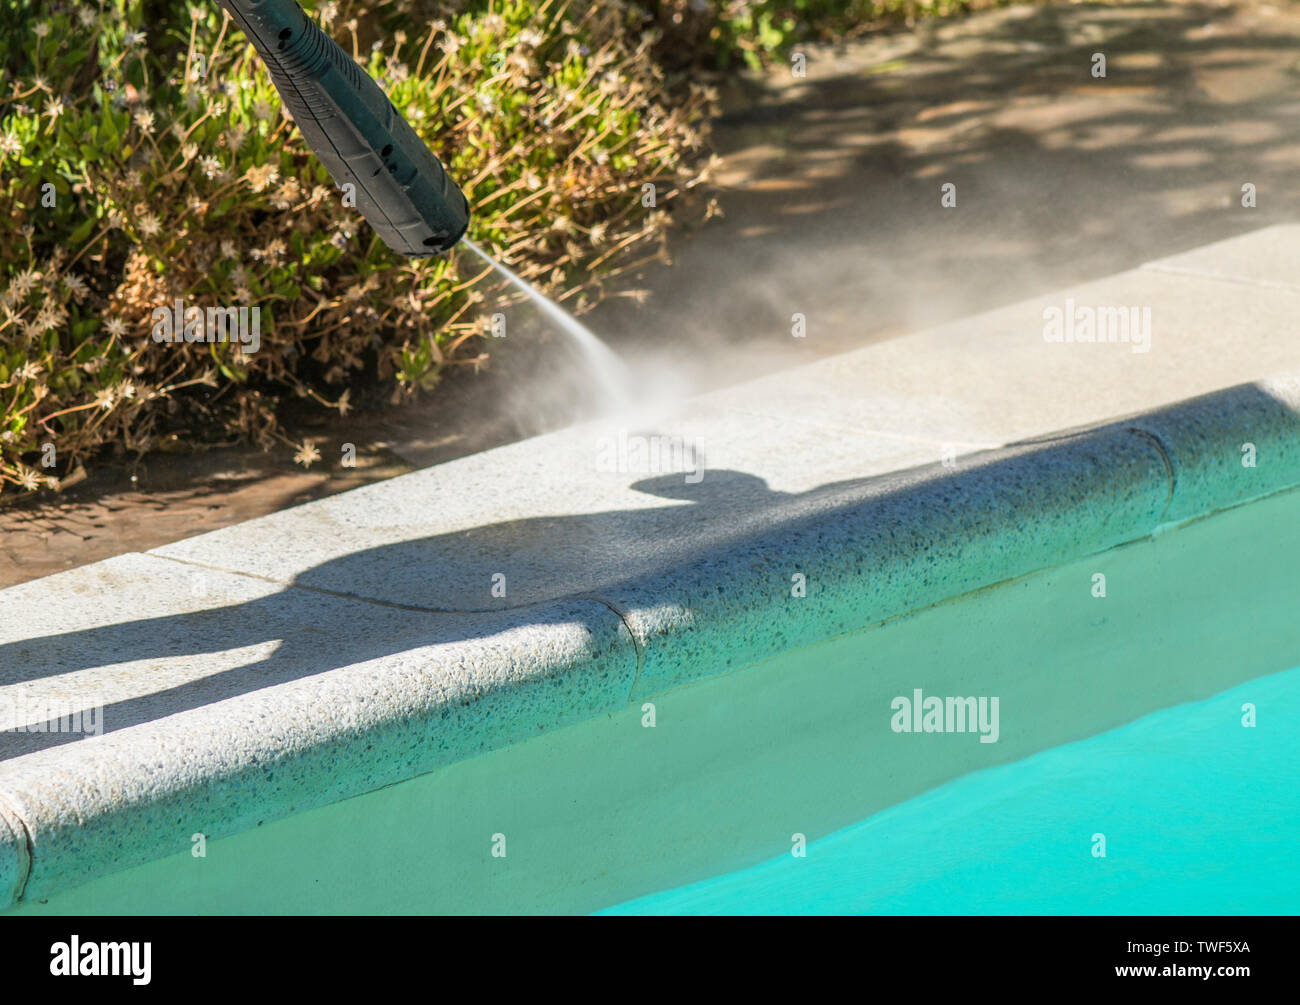 Border of a swimming pool border being cleaned with high pressure washer. Stock Photo